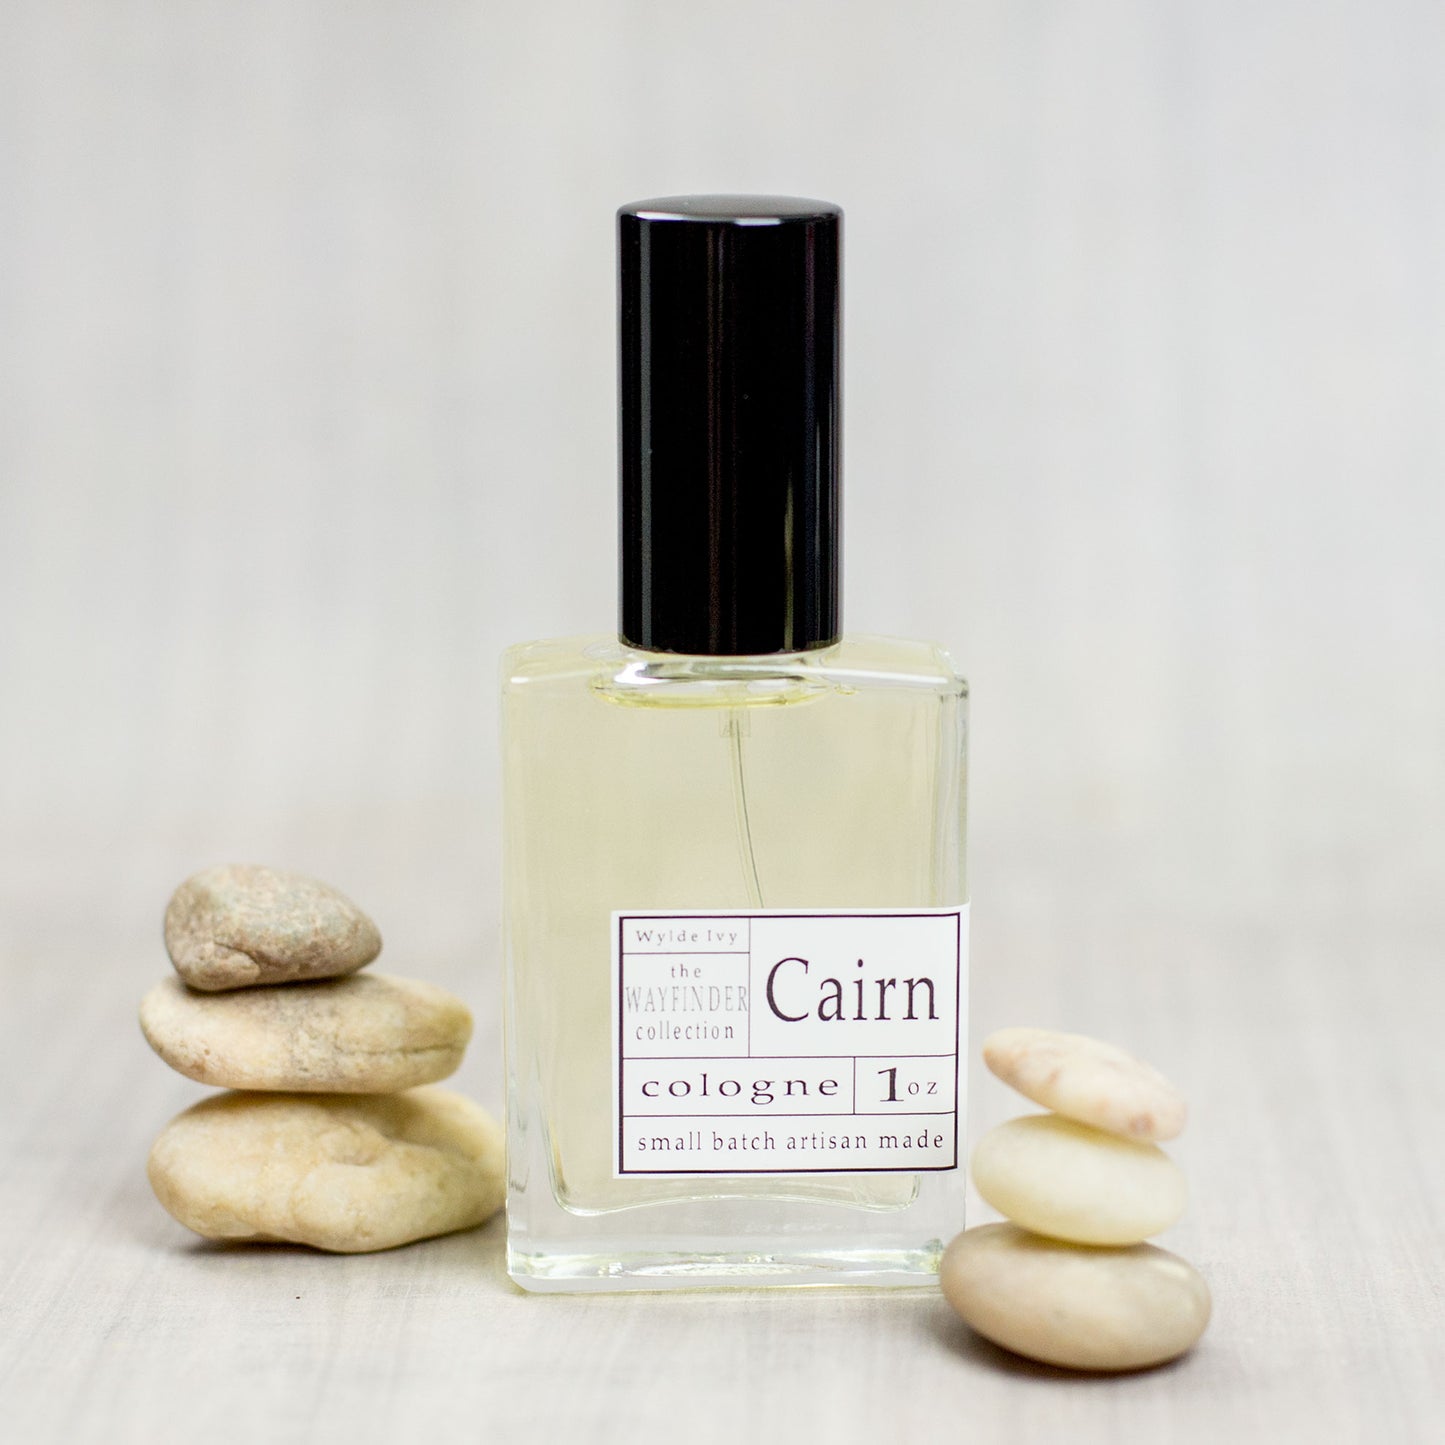 Cairn Cologne